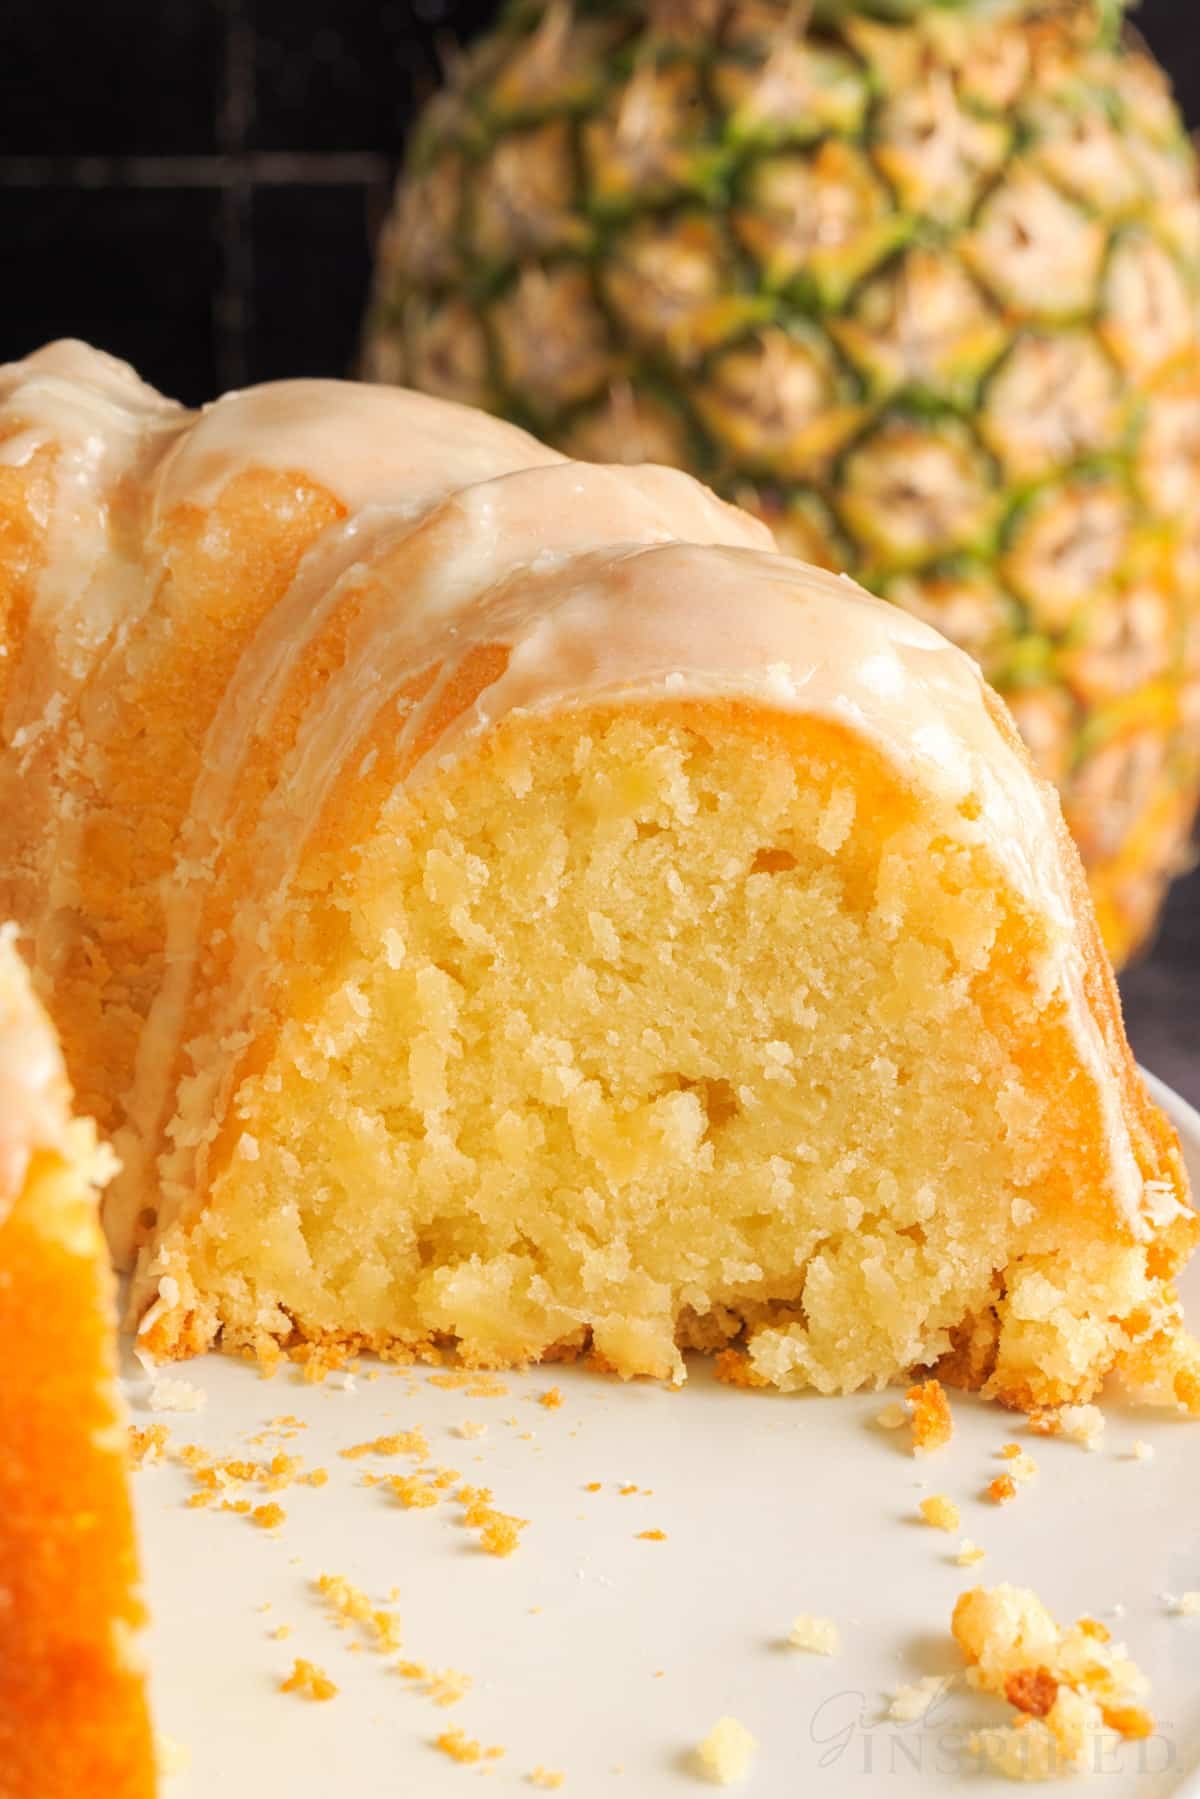 Right close up of Pineapple Pound Cake with slices missing.